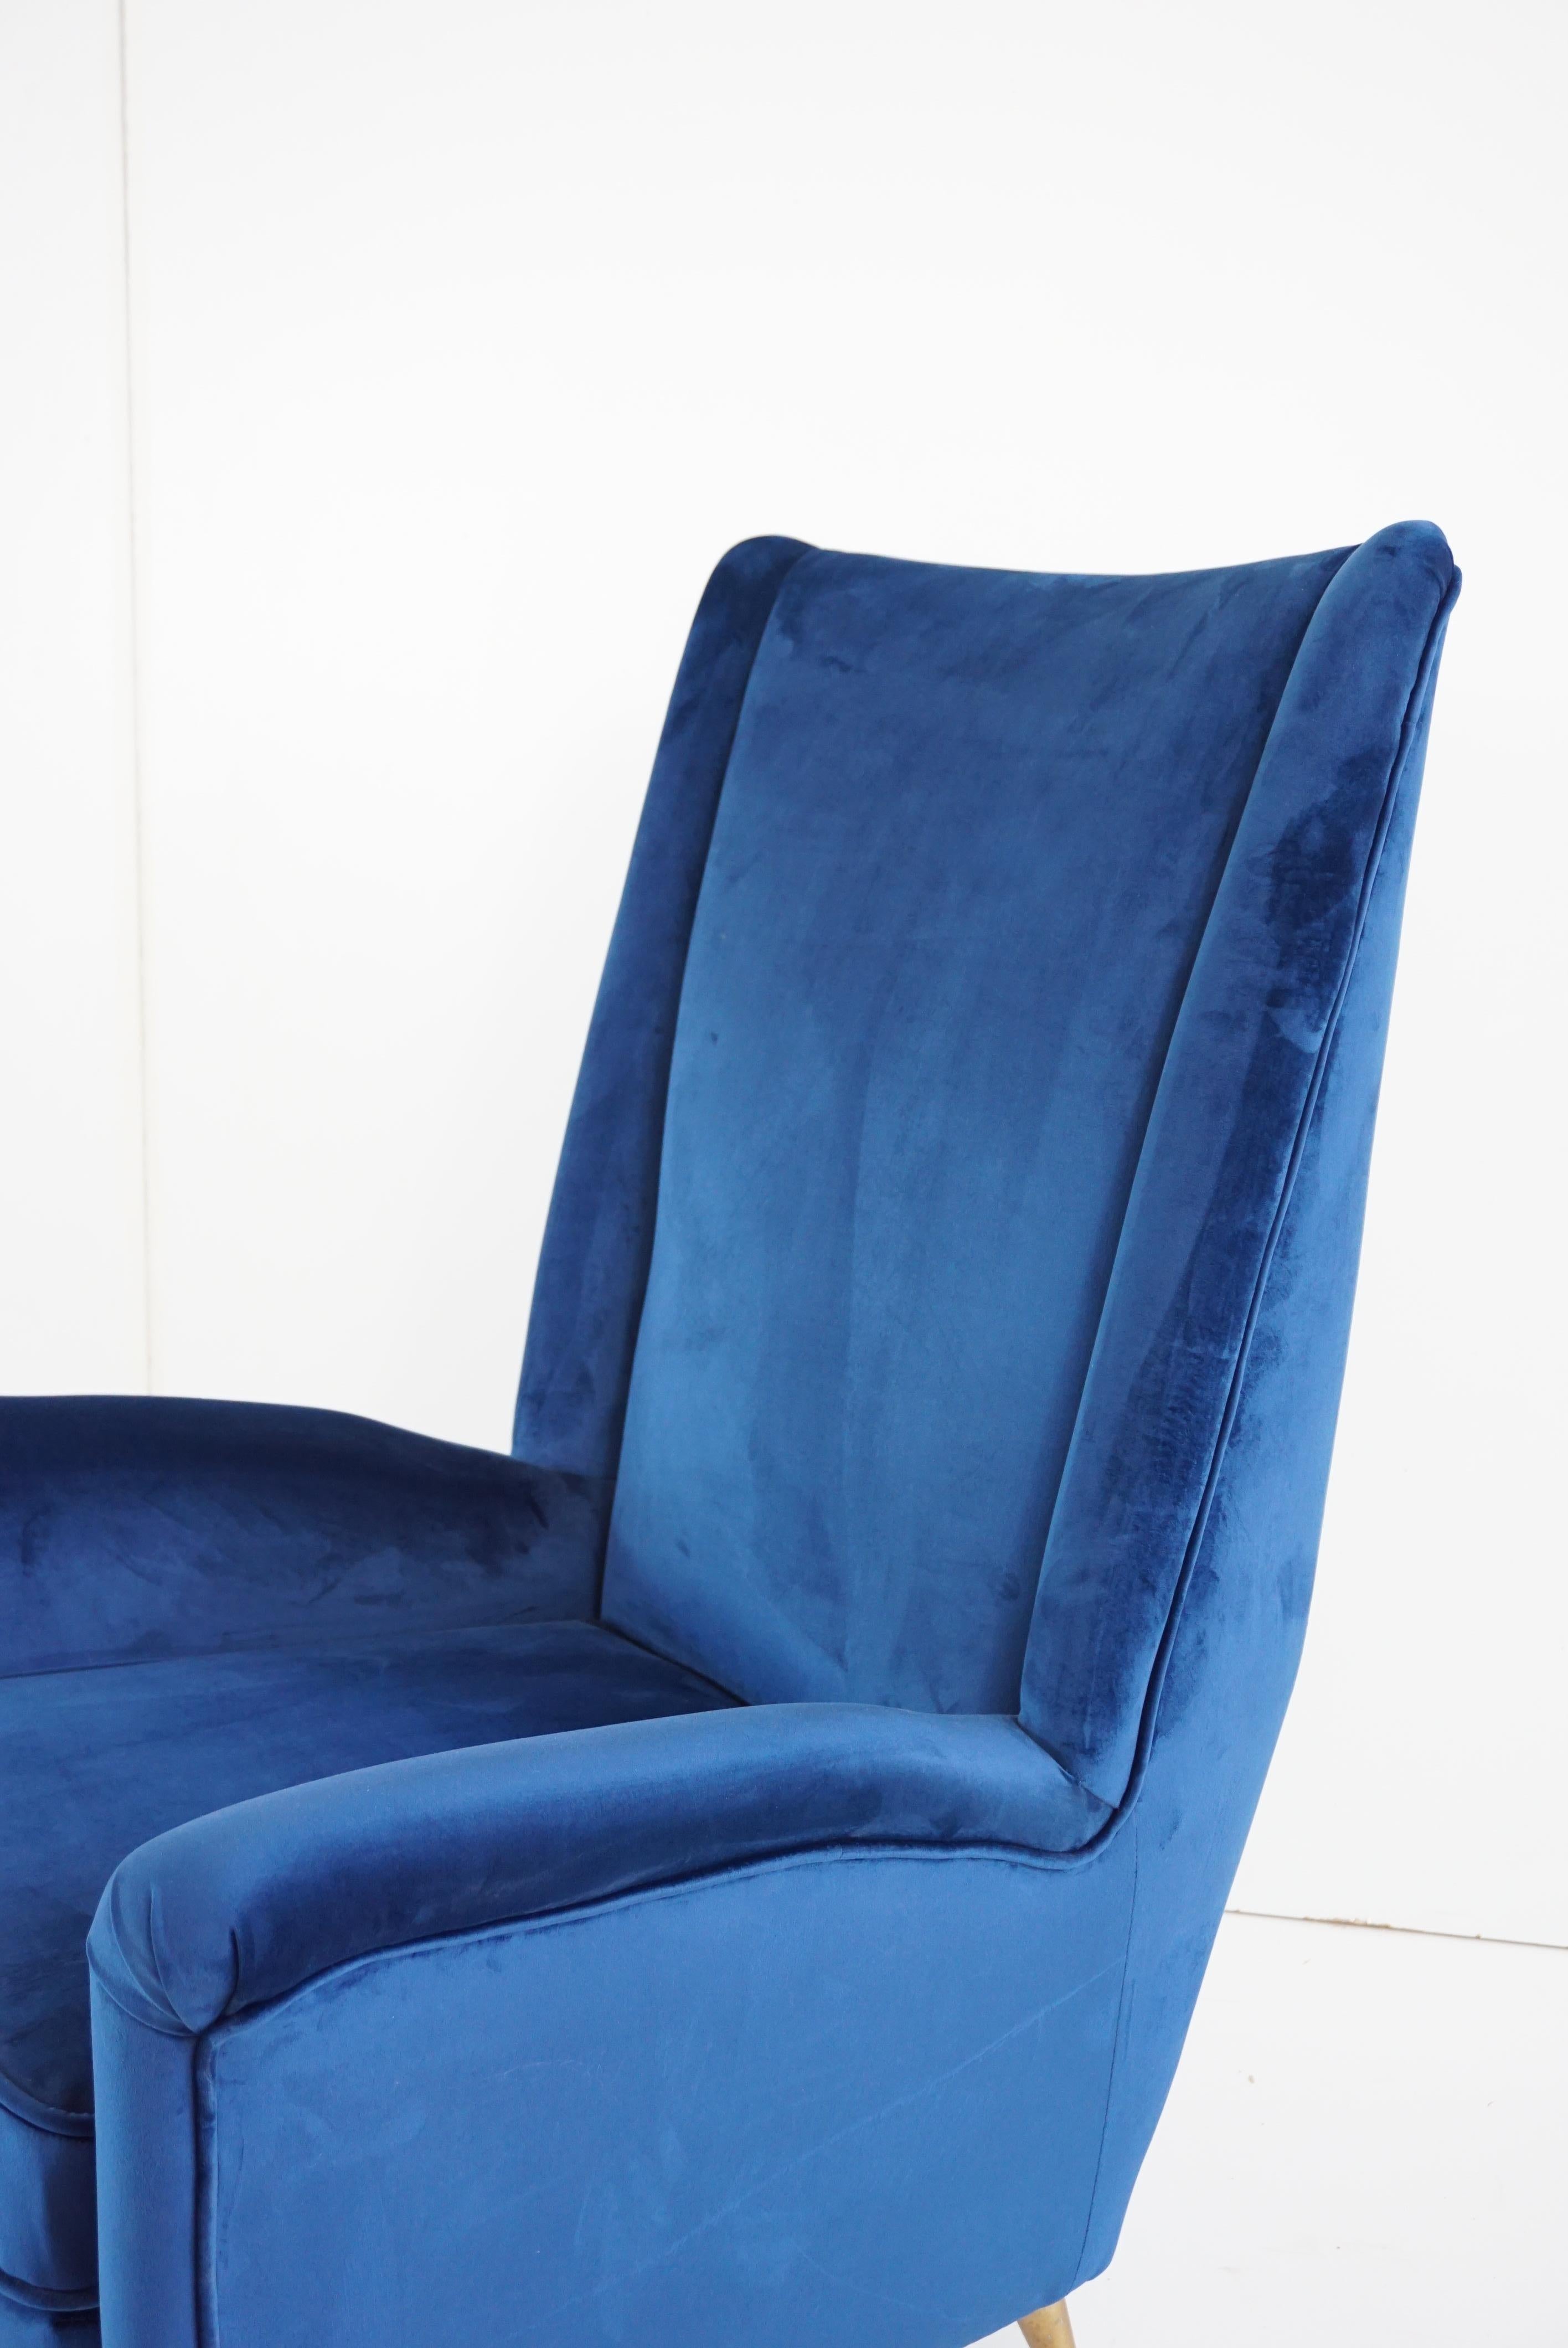 Pair of Blu Velvet Gio Ponti Bergere Wingback Armchairs by ISA, 1950 For Sale 4